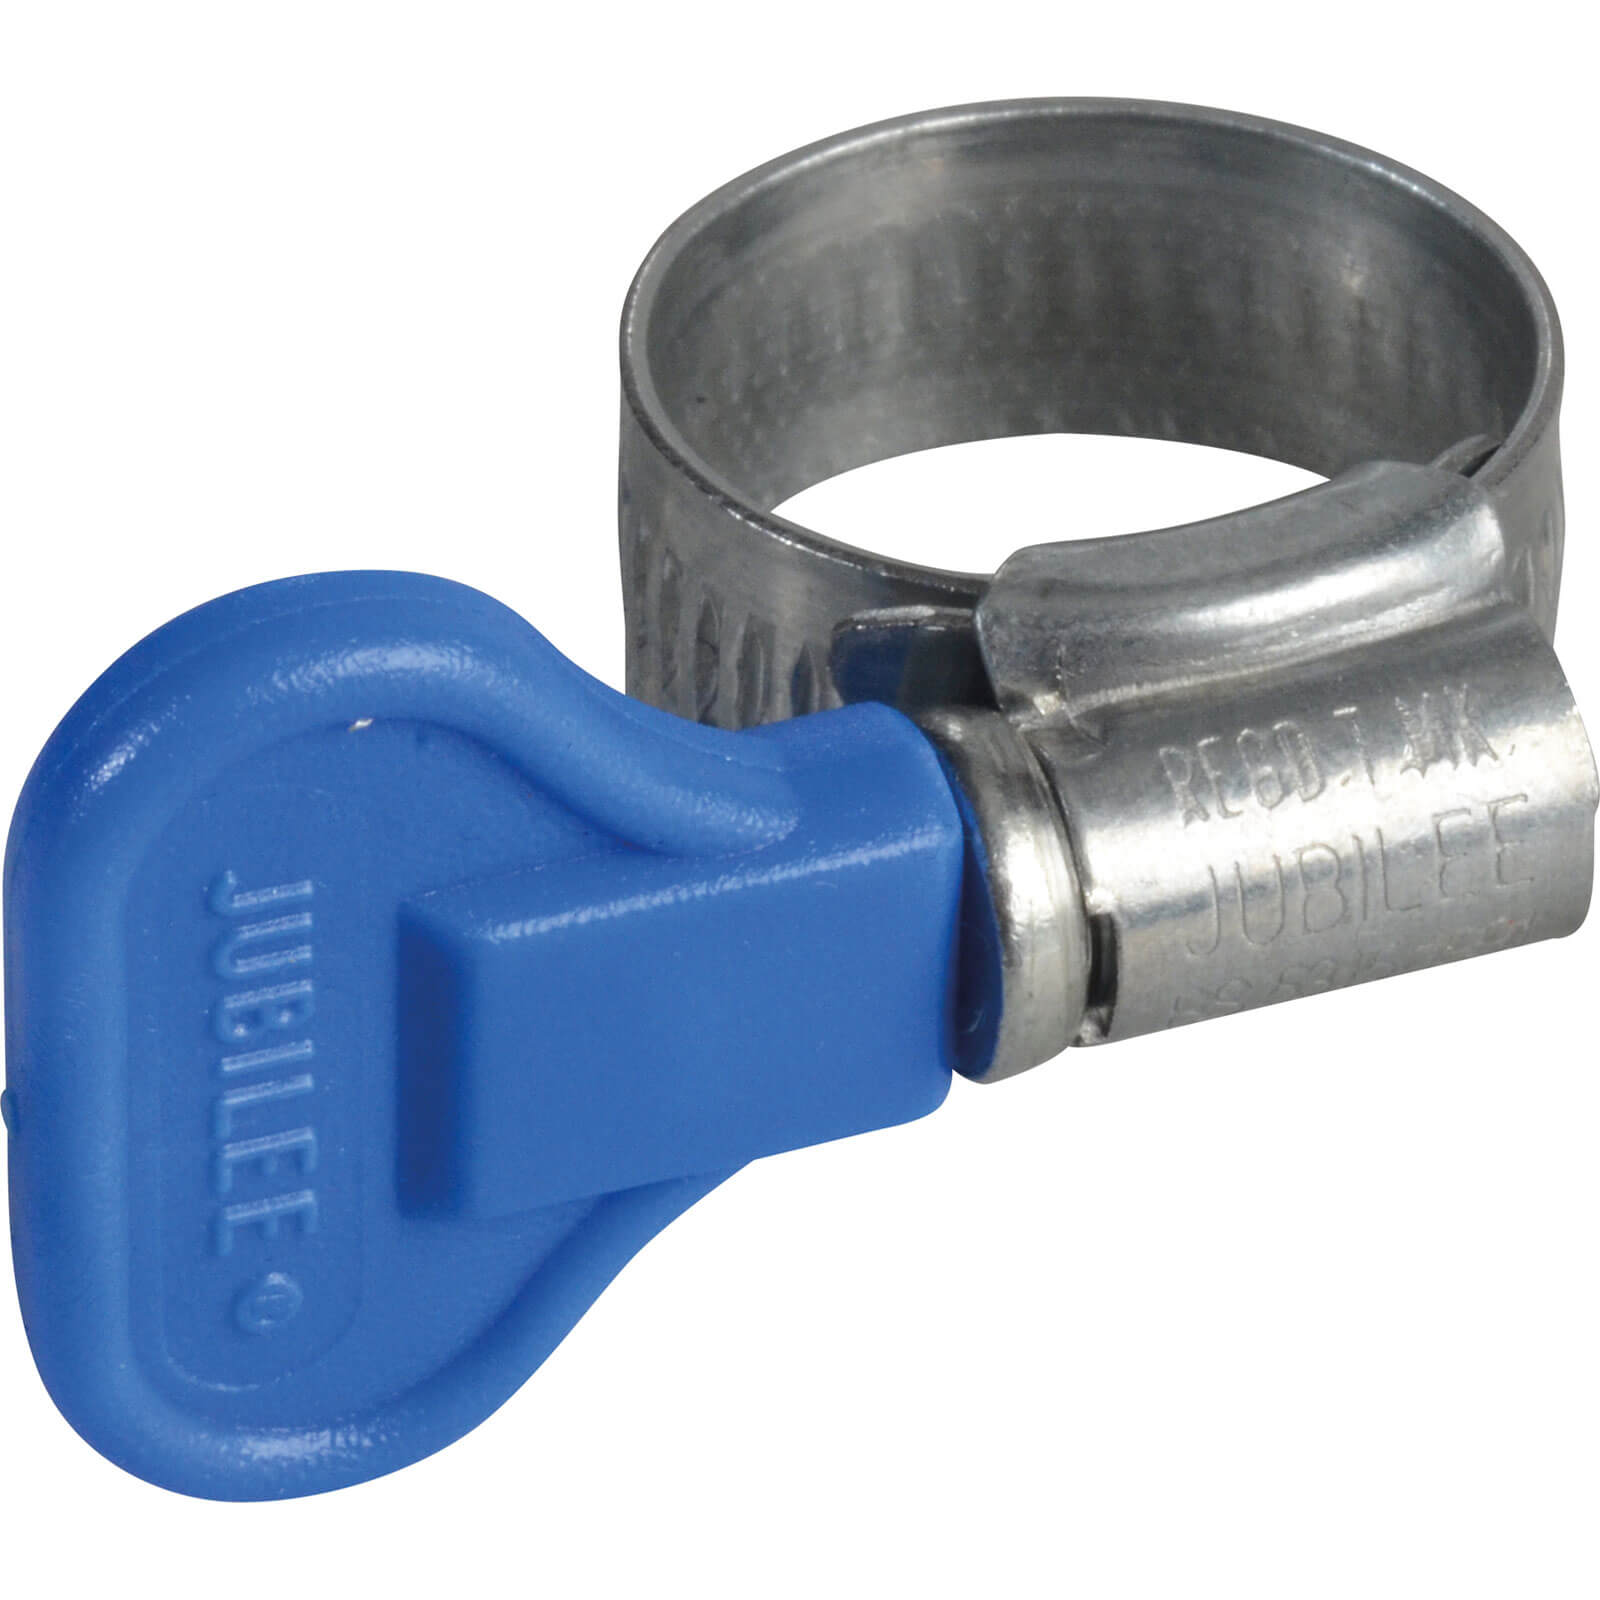 Jubilee 1X Zinc Plated Hose Clip with Wing Spade 25 - 40mm (1 to 1 5/8")